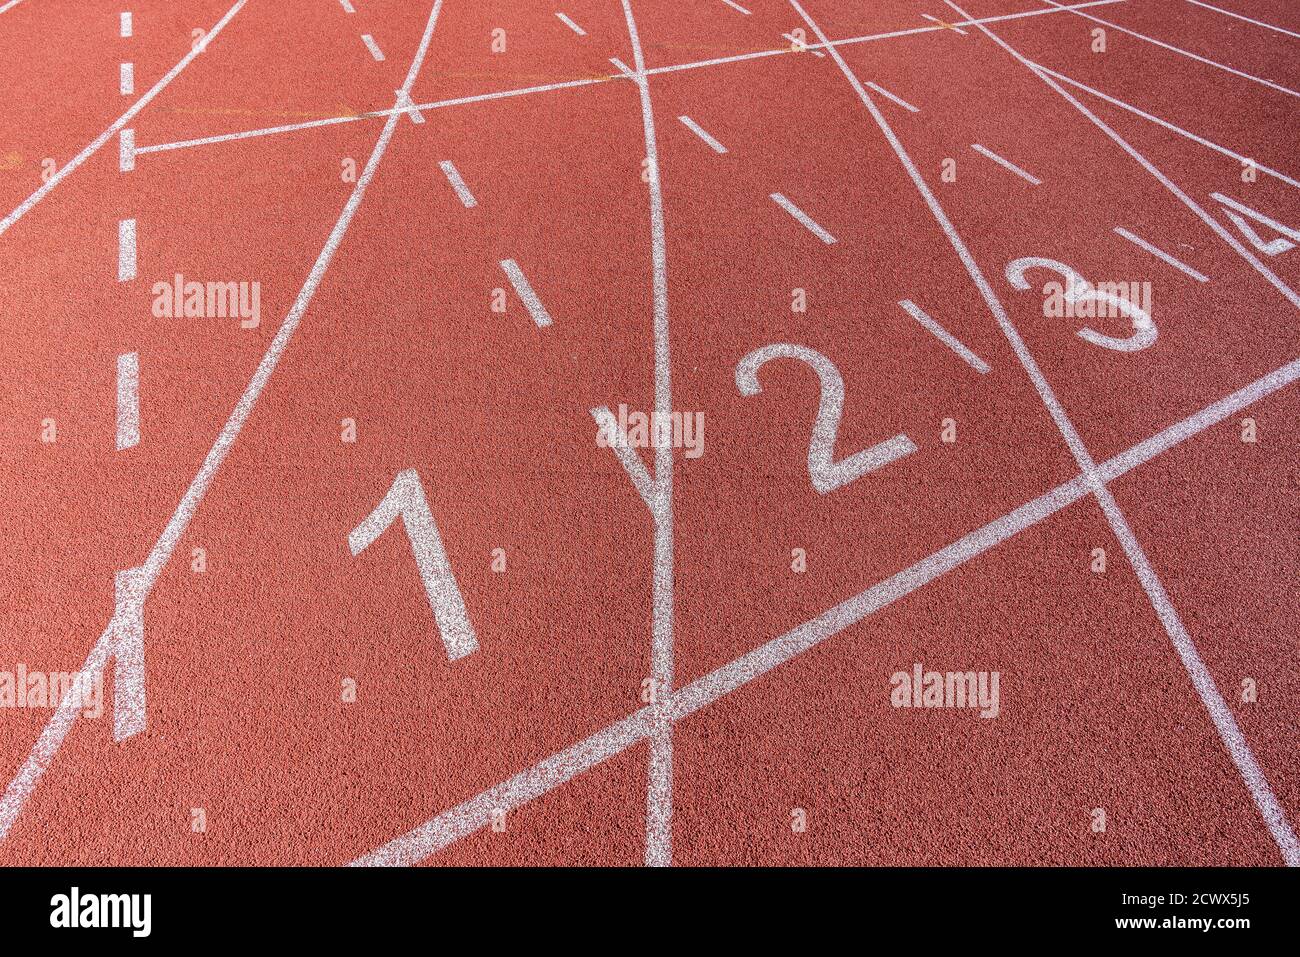 White painted lines and numbers on a running track in a athleticism and sports field. . High quality photo Stock Photo